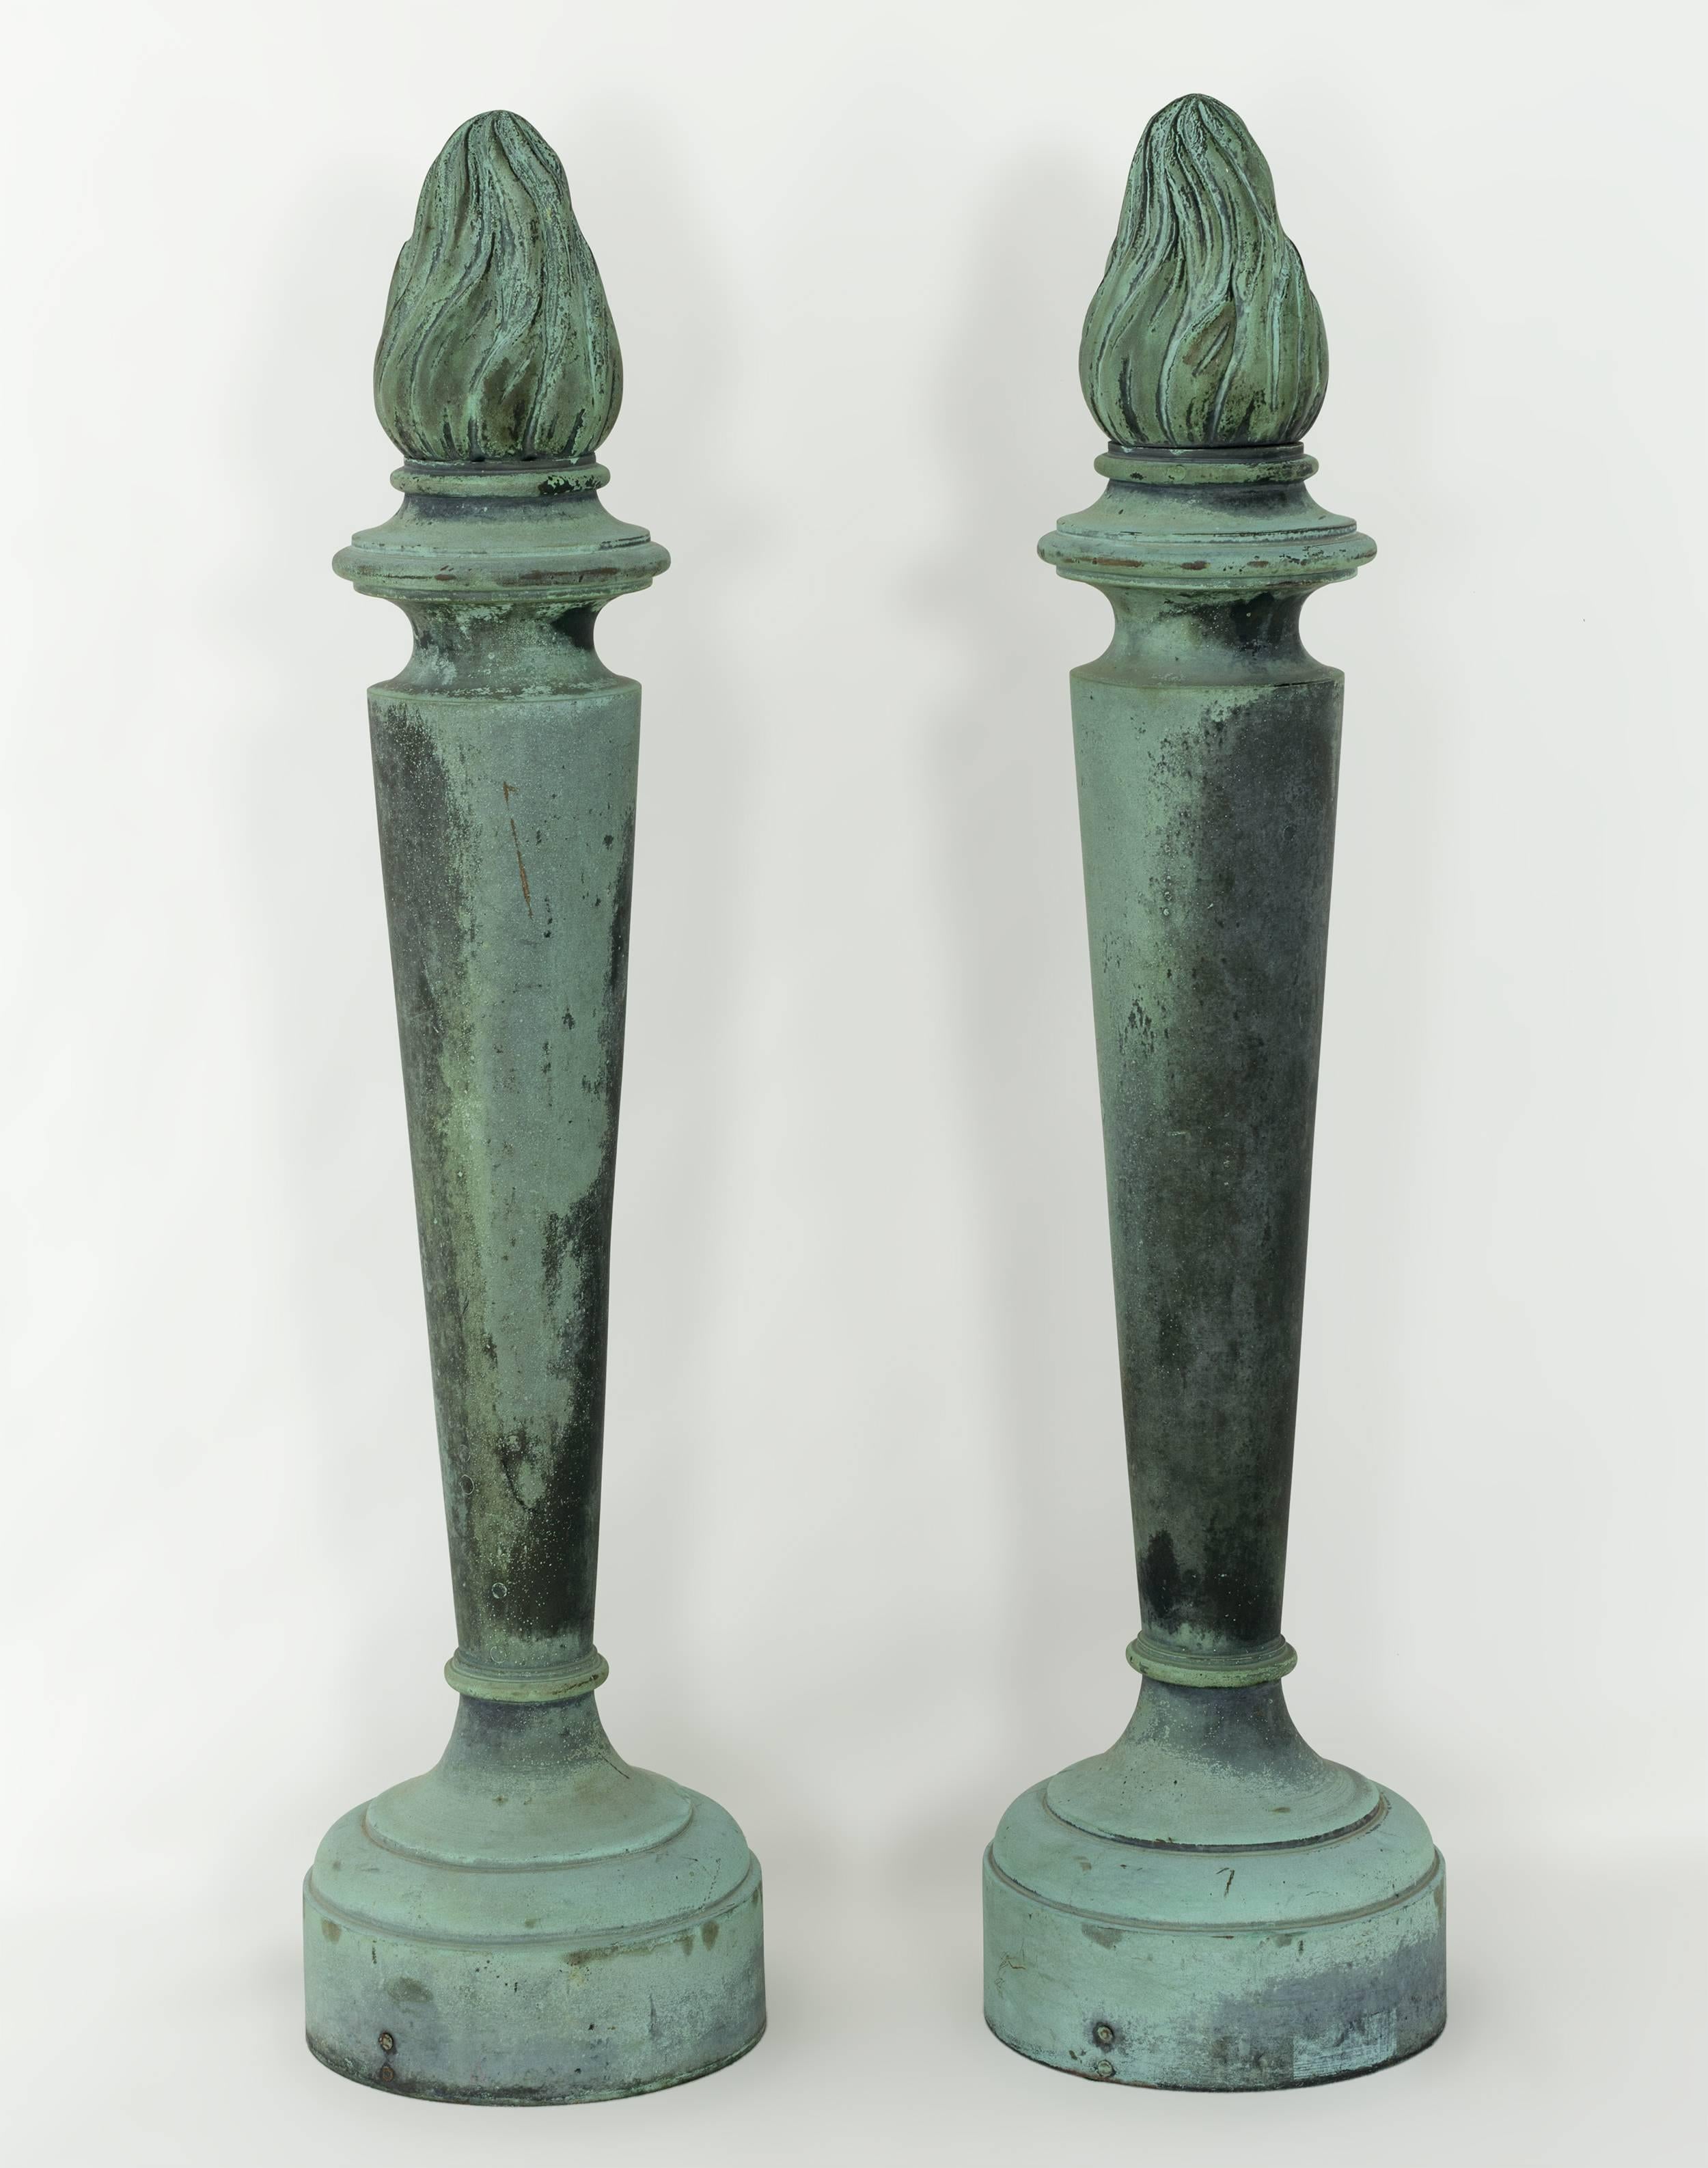 Solid bronze with natural aged verdigris surface.